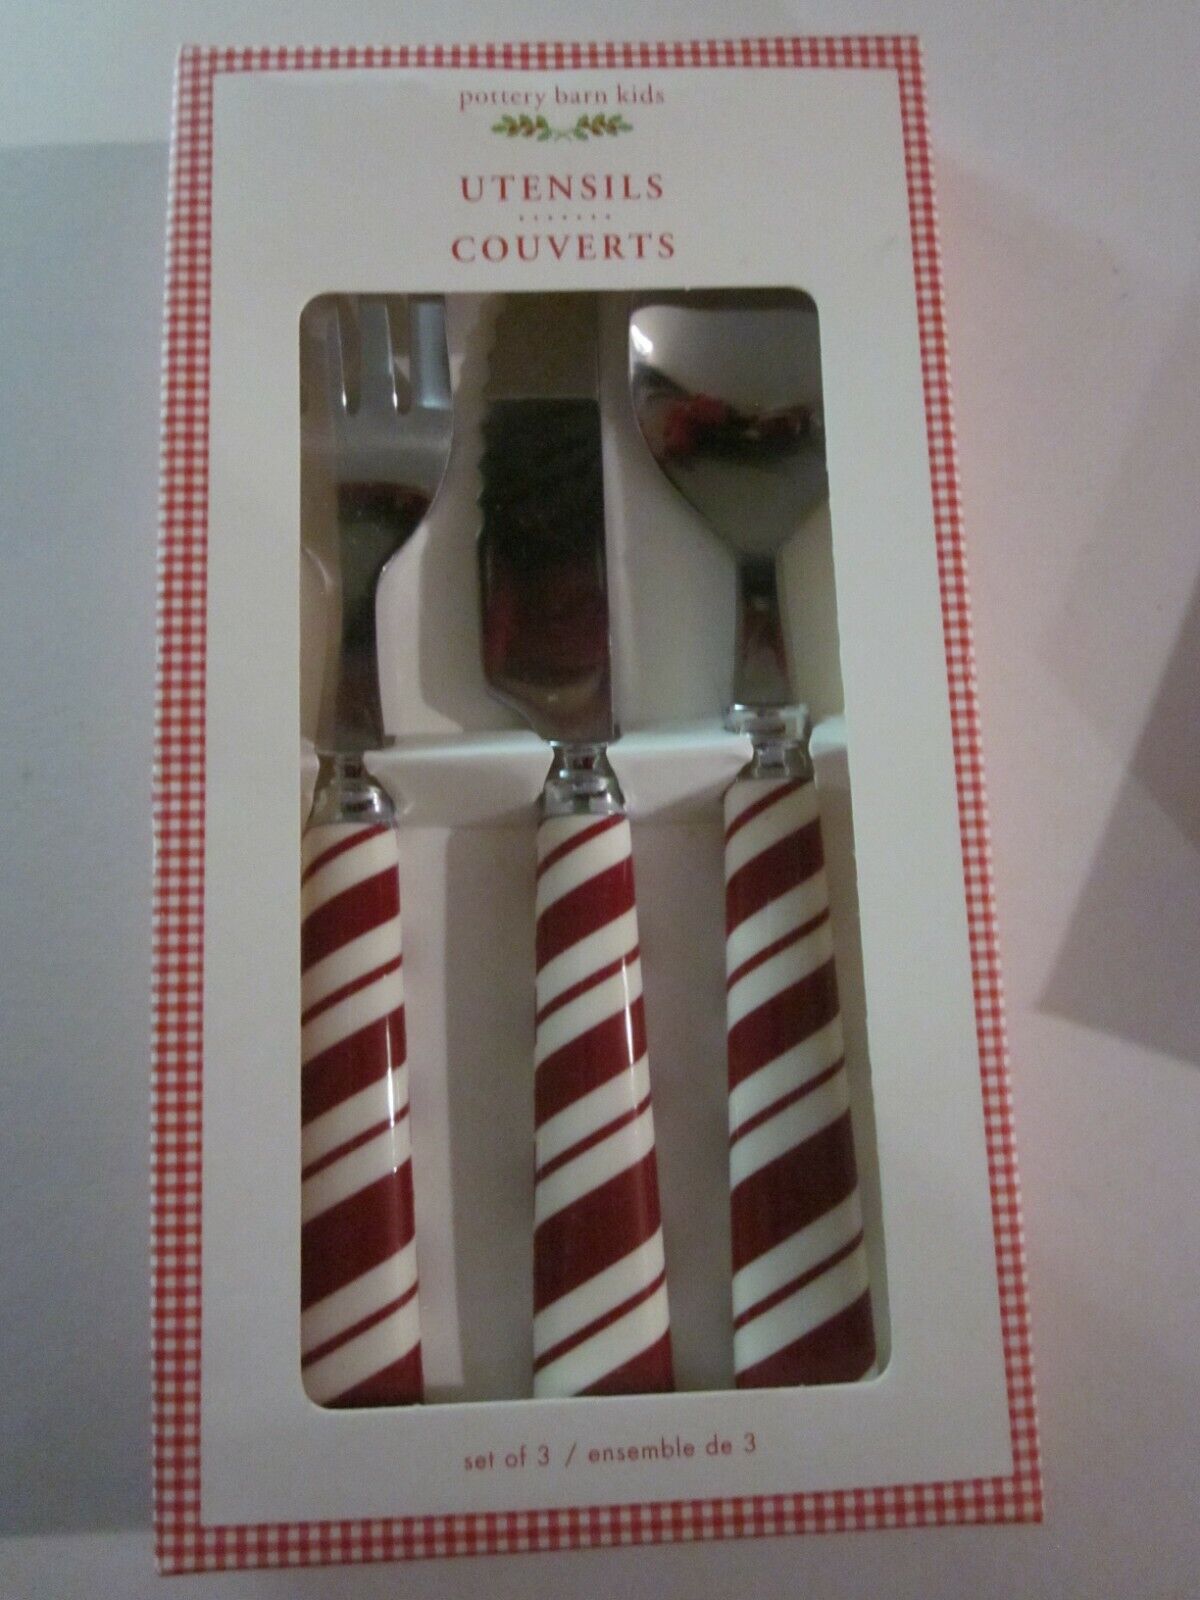 One 3pc Pottery Barn Kids Christmas Candy Cane Utensils - Fork Spoon & Knife